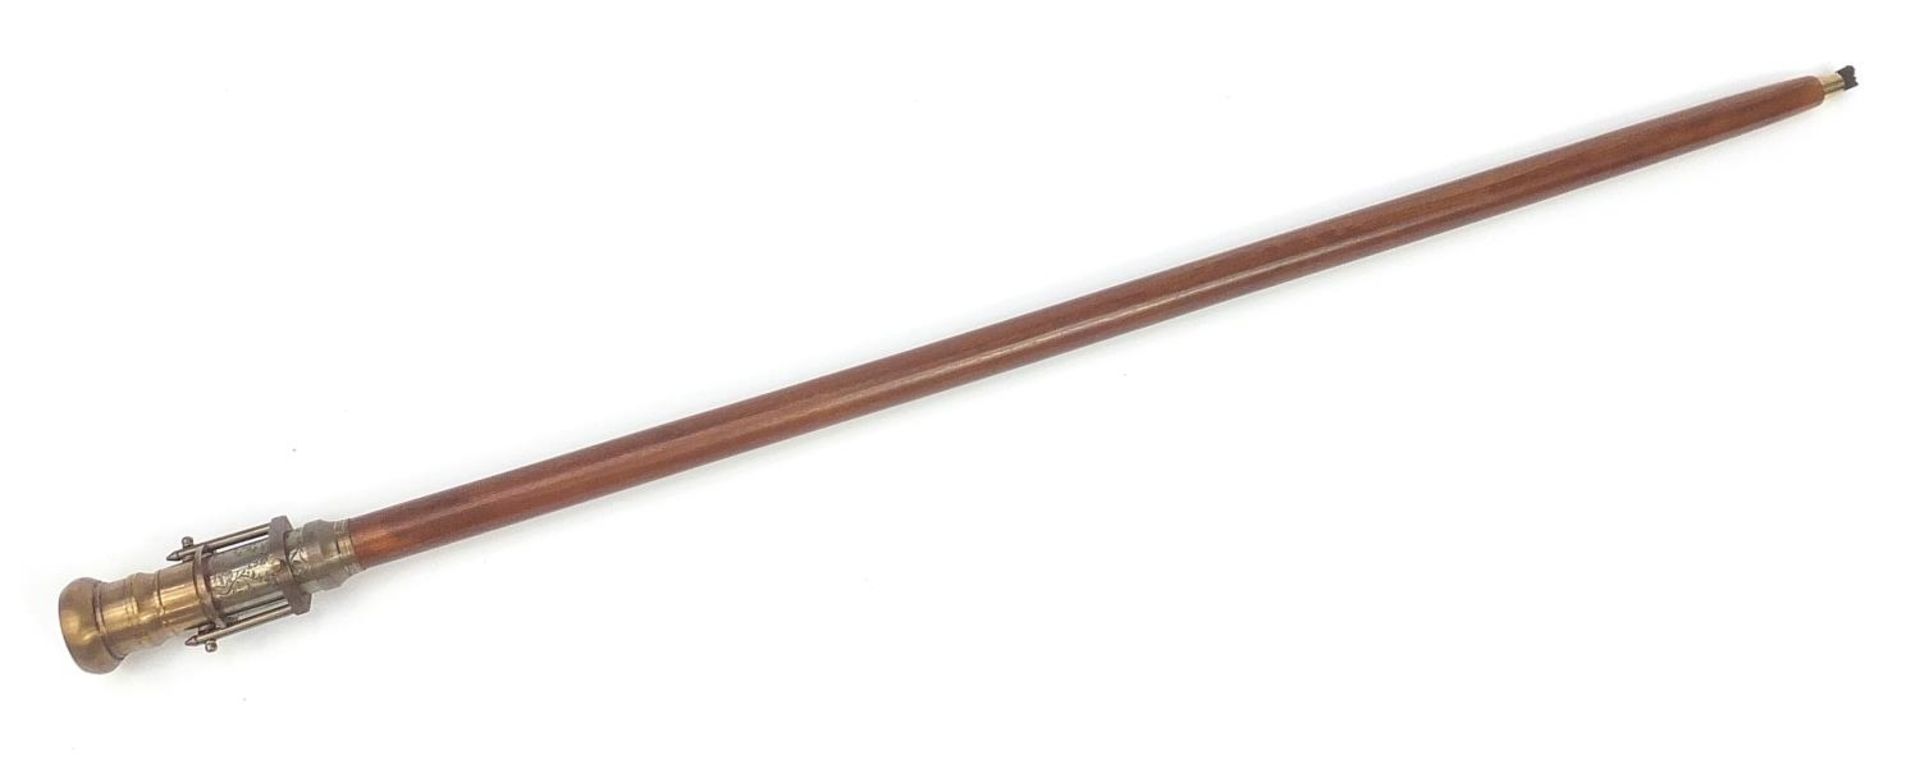 Hardwood walking stick with brass two draw telescope and compass handle, 100cm in length - Image 3 of 5